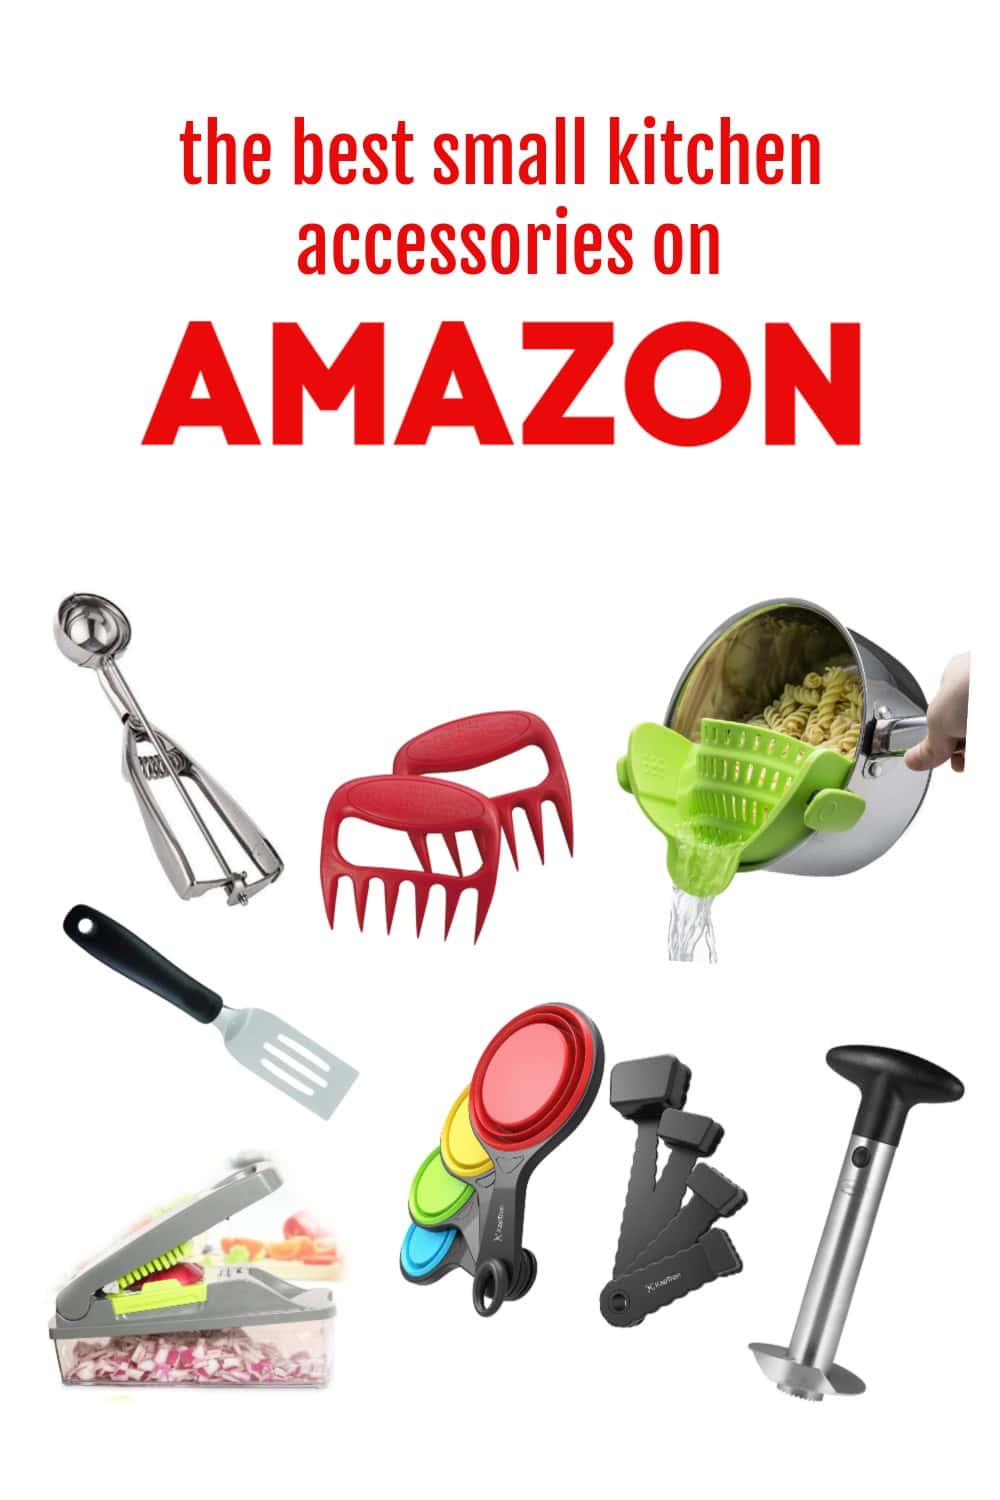 8 of the BEST Small Kitchen Accessories on Amazon